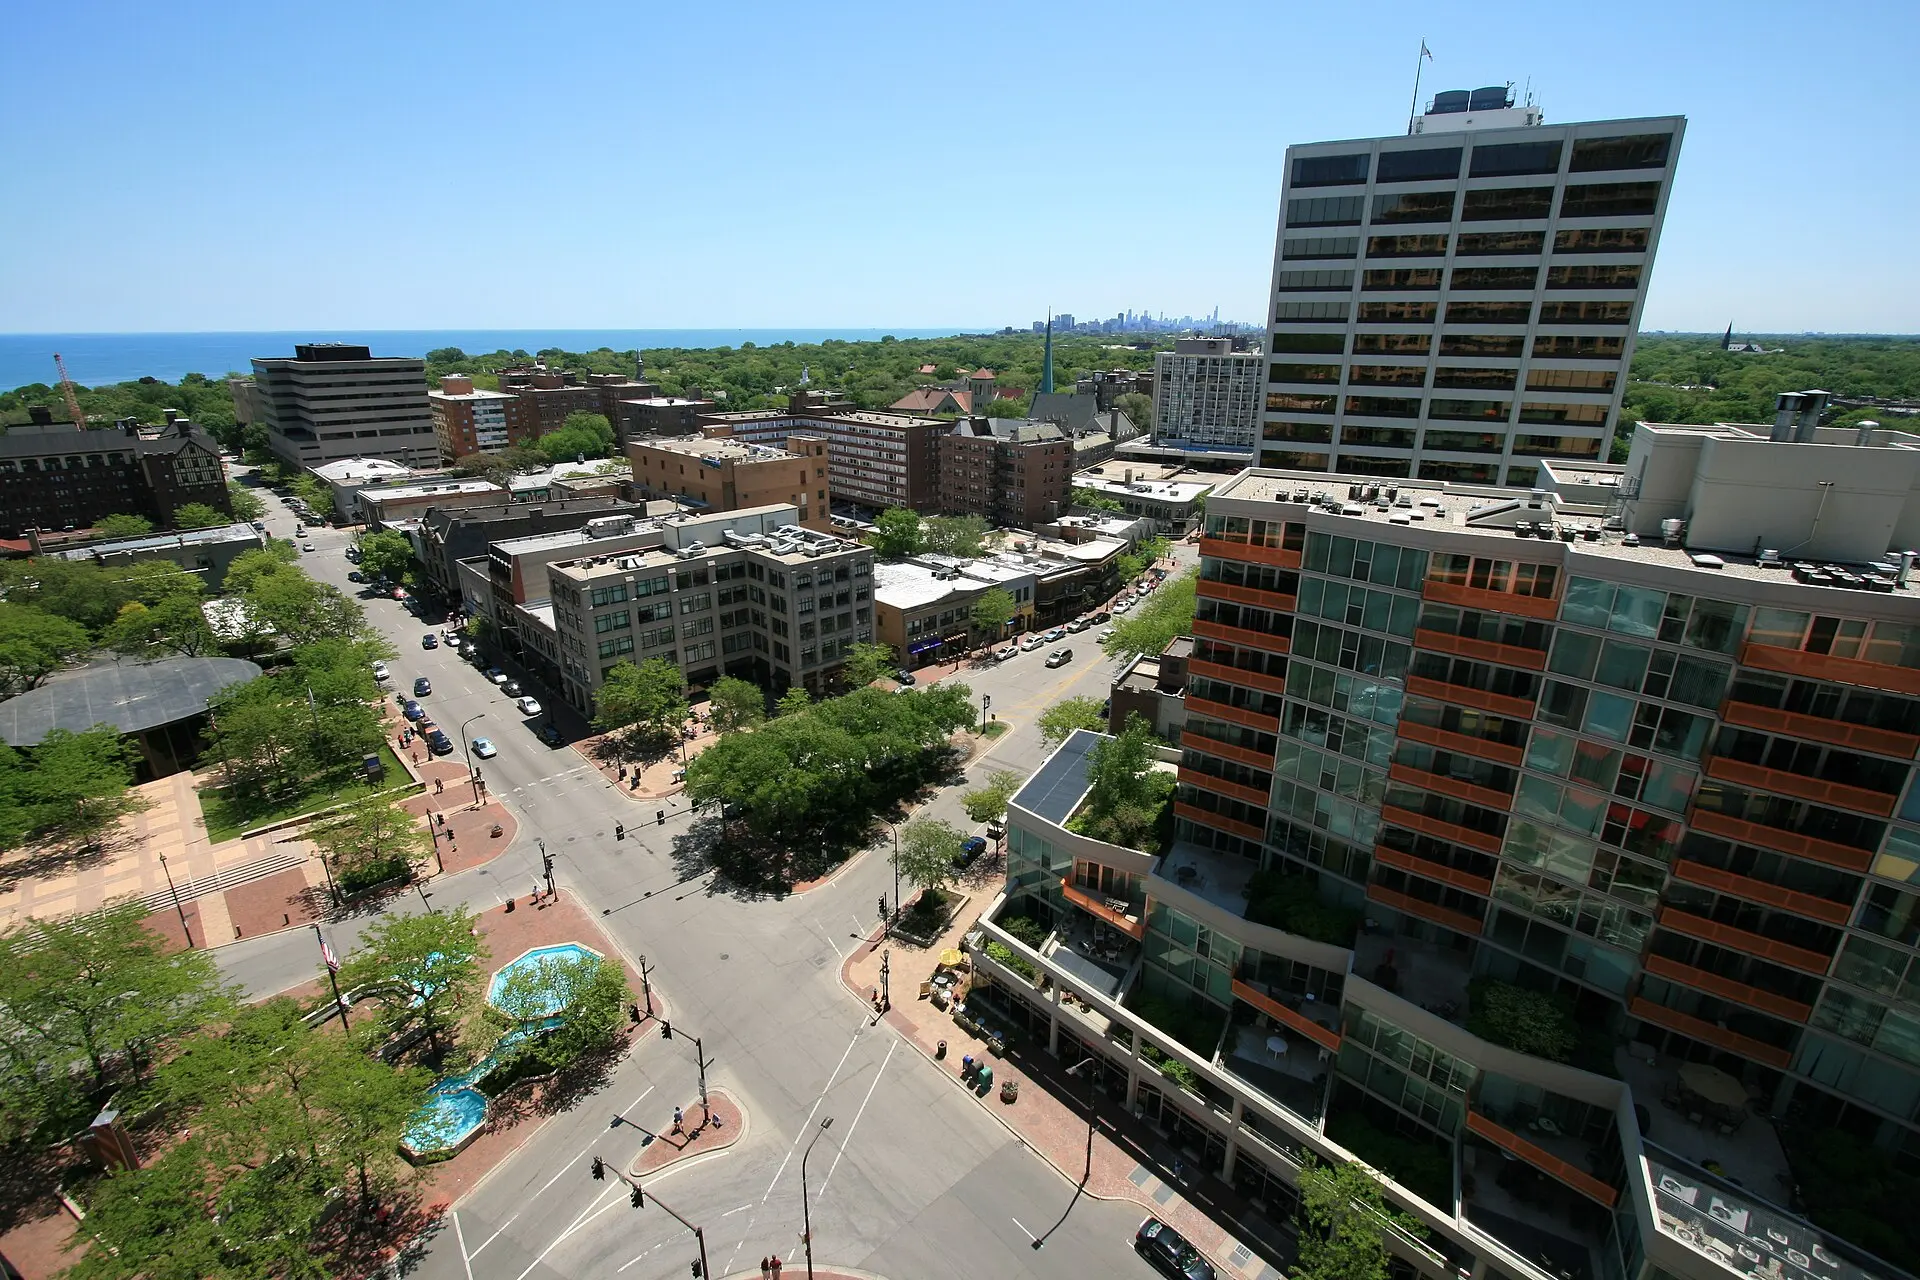 View of Fountain Square in Evanston, Illinois looking south-southeast towards Chicago and Lake Michigan